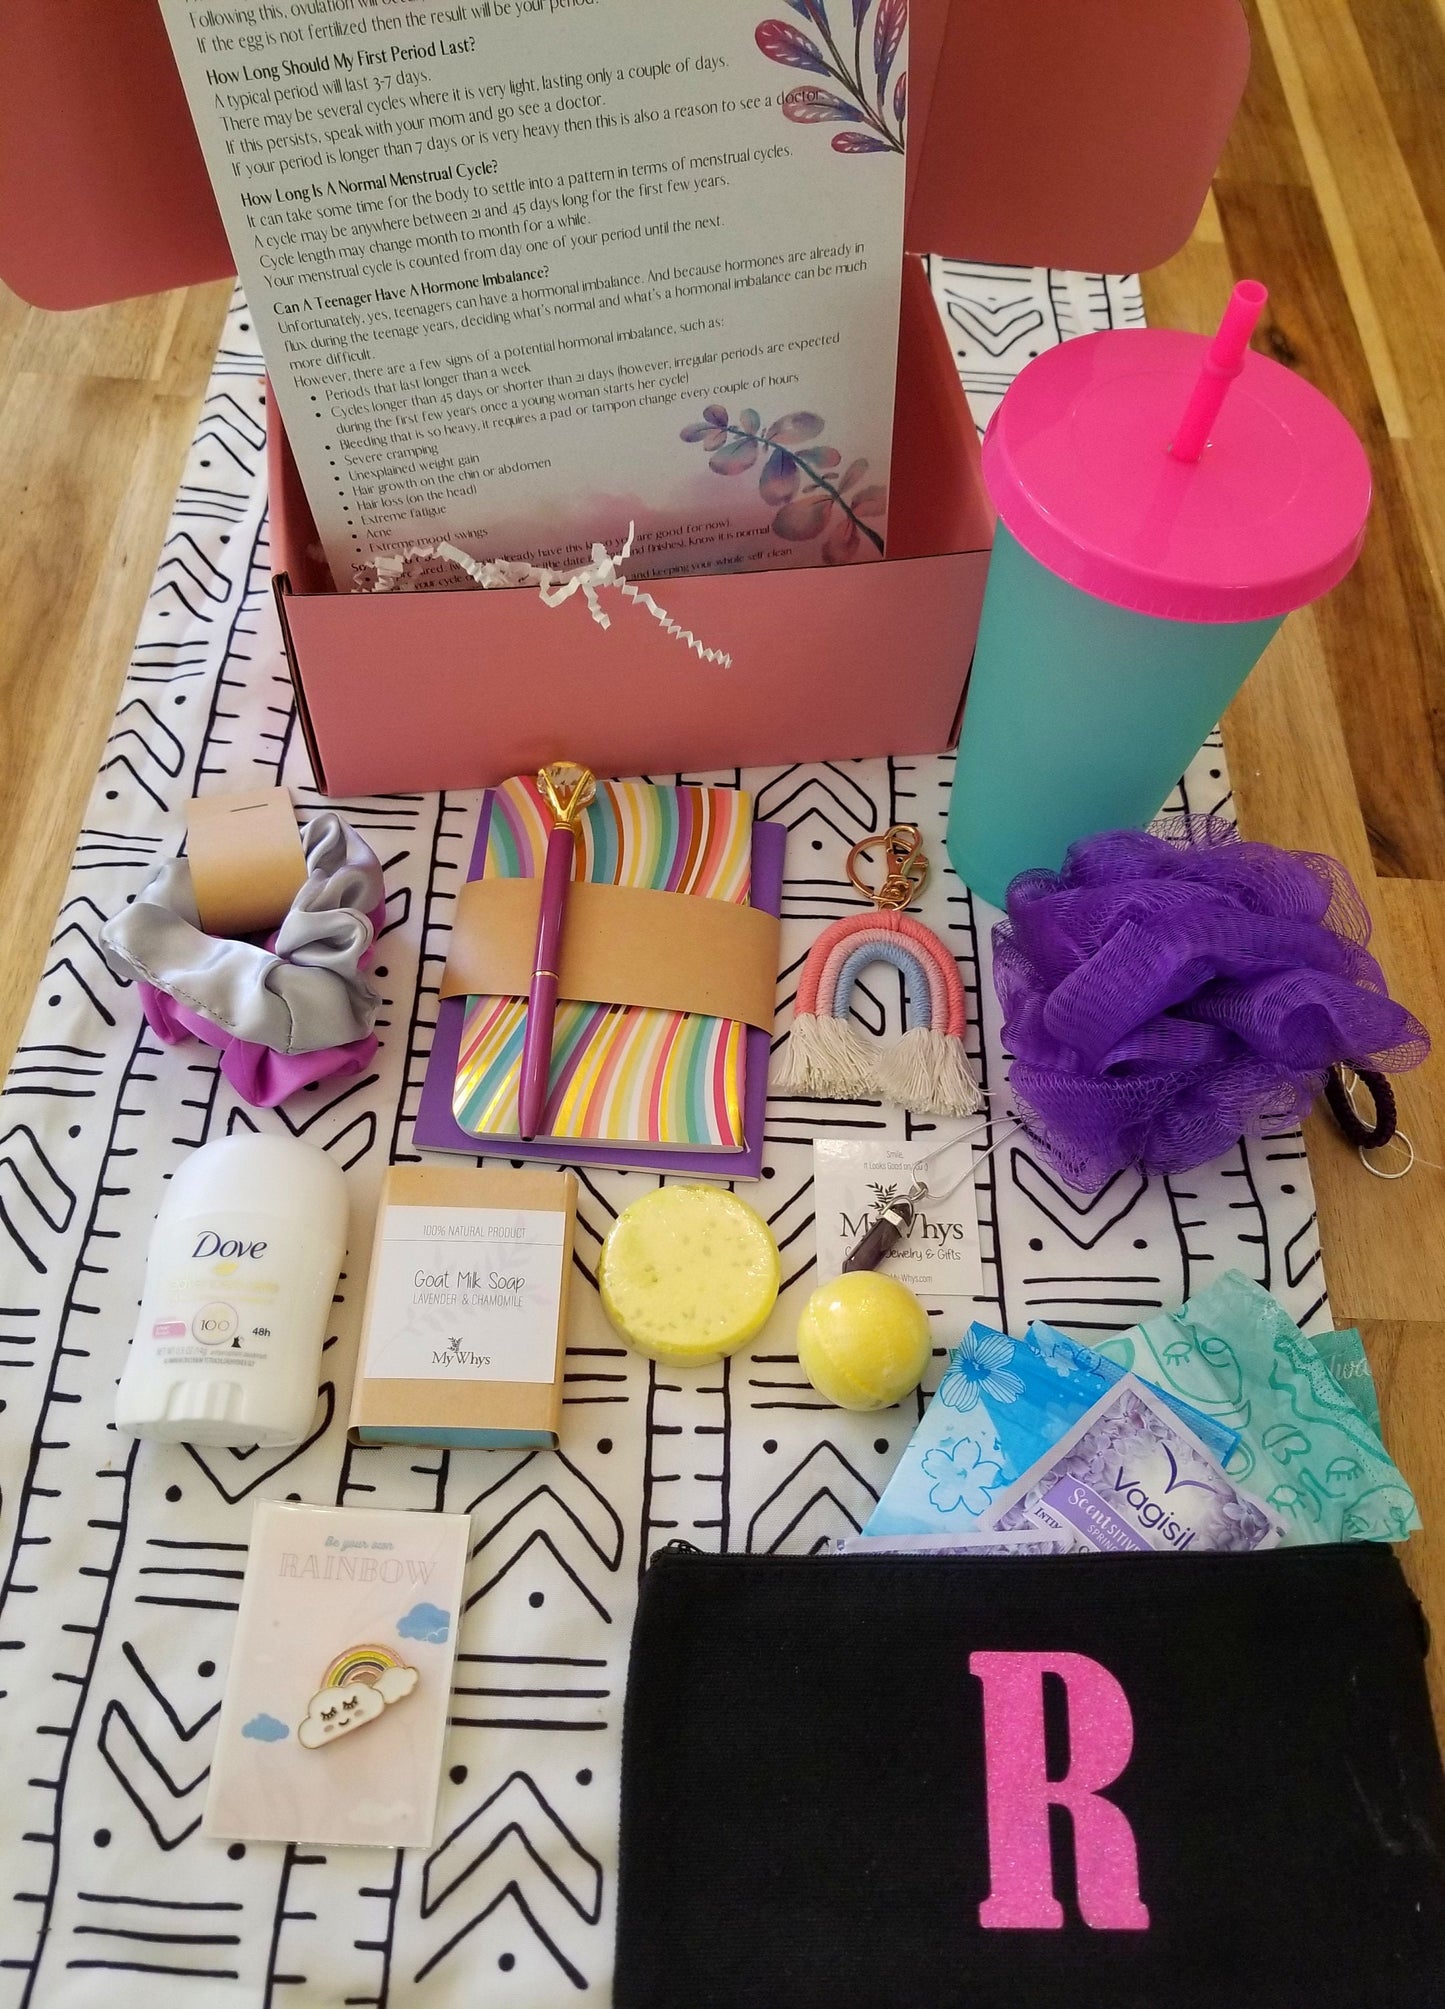 First period gift set, Care package for teen and tween girl